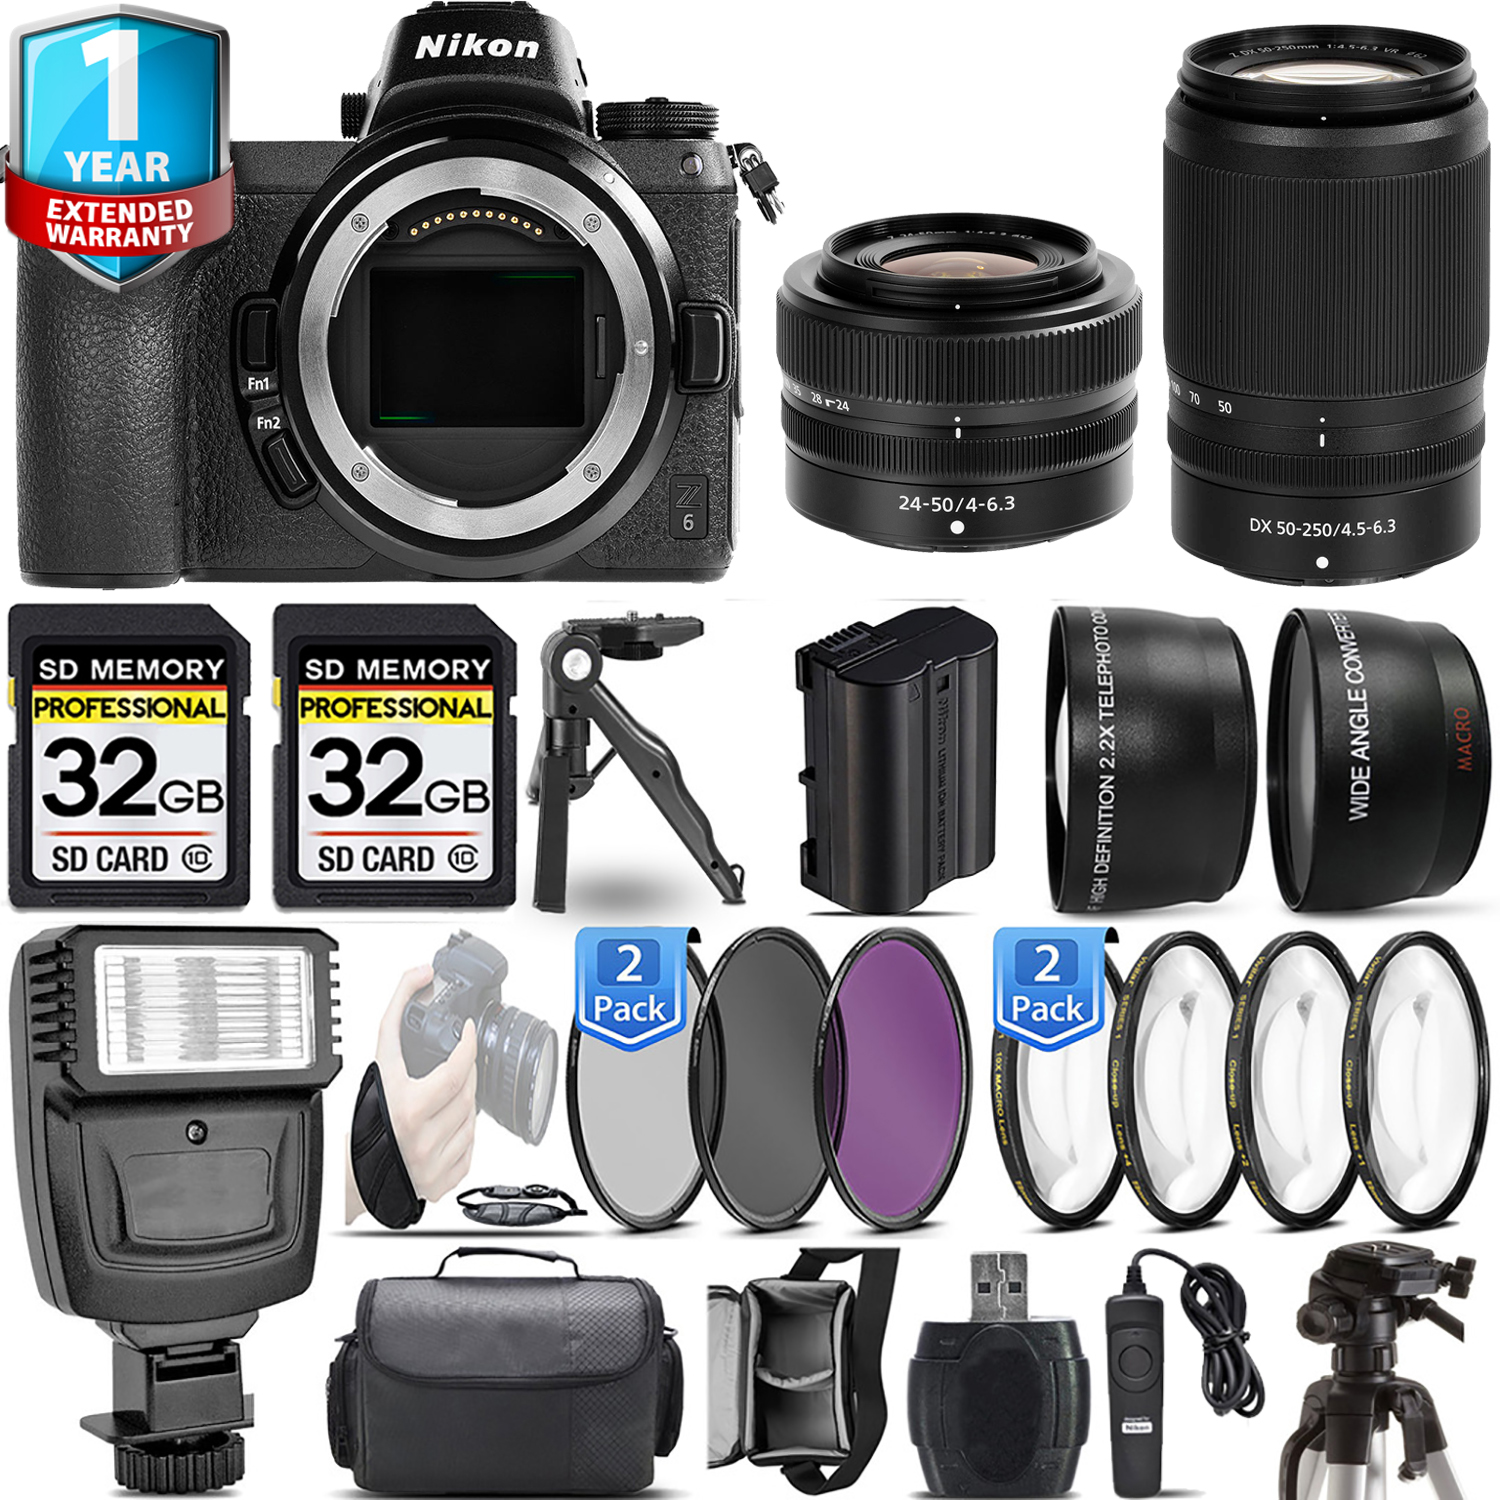 Z6 Mirrorless Camera + 50-250mm + 24-50mm + 1 Year Extended Warranty + 64GB Basic Kit *FREE SHIPPING*